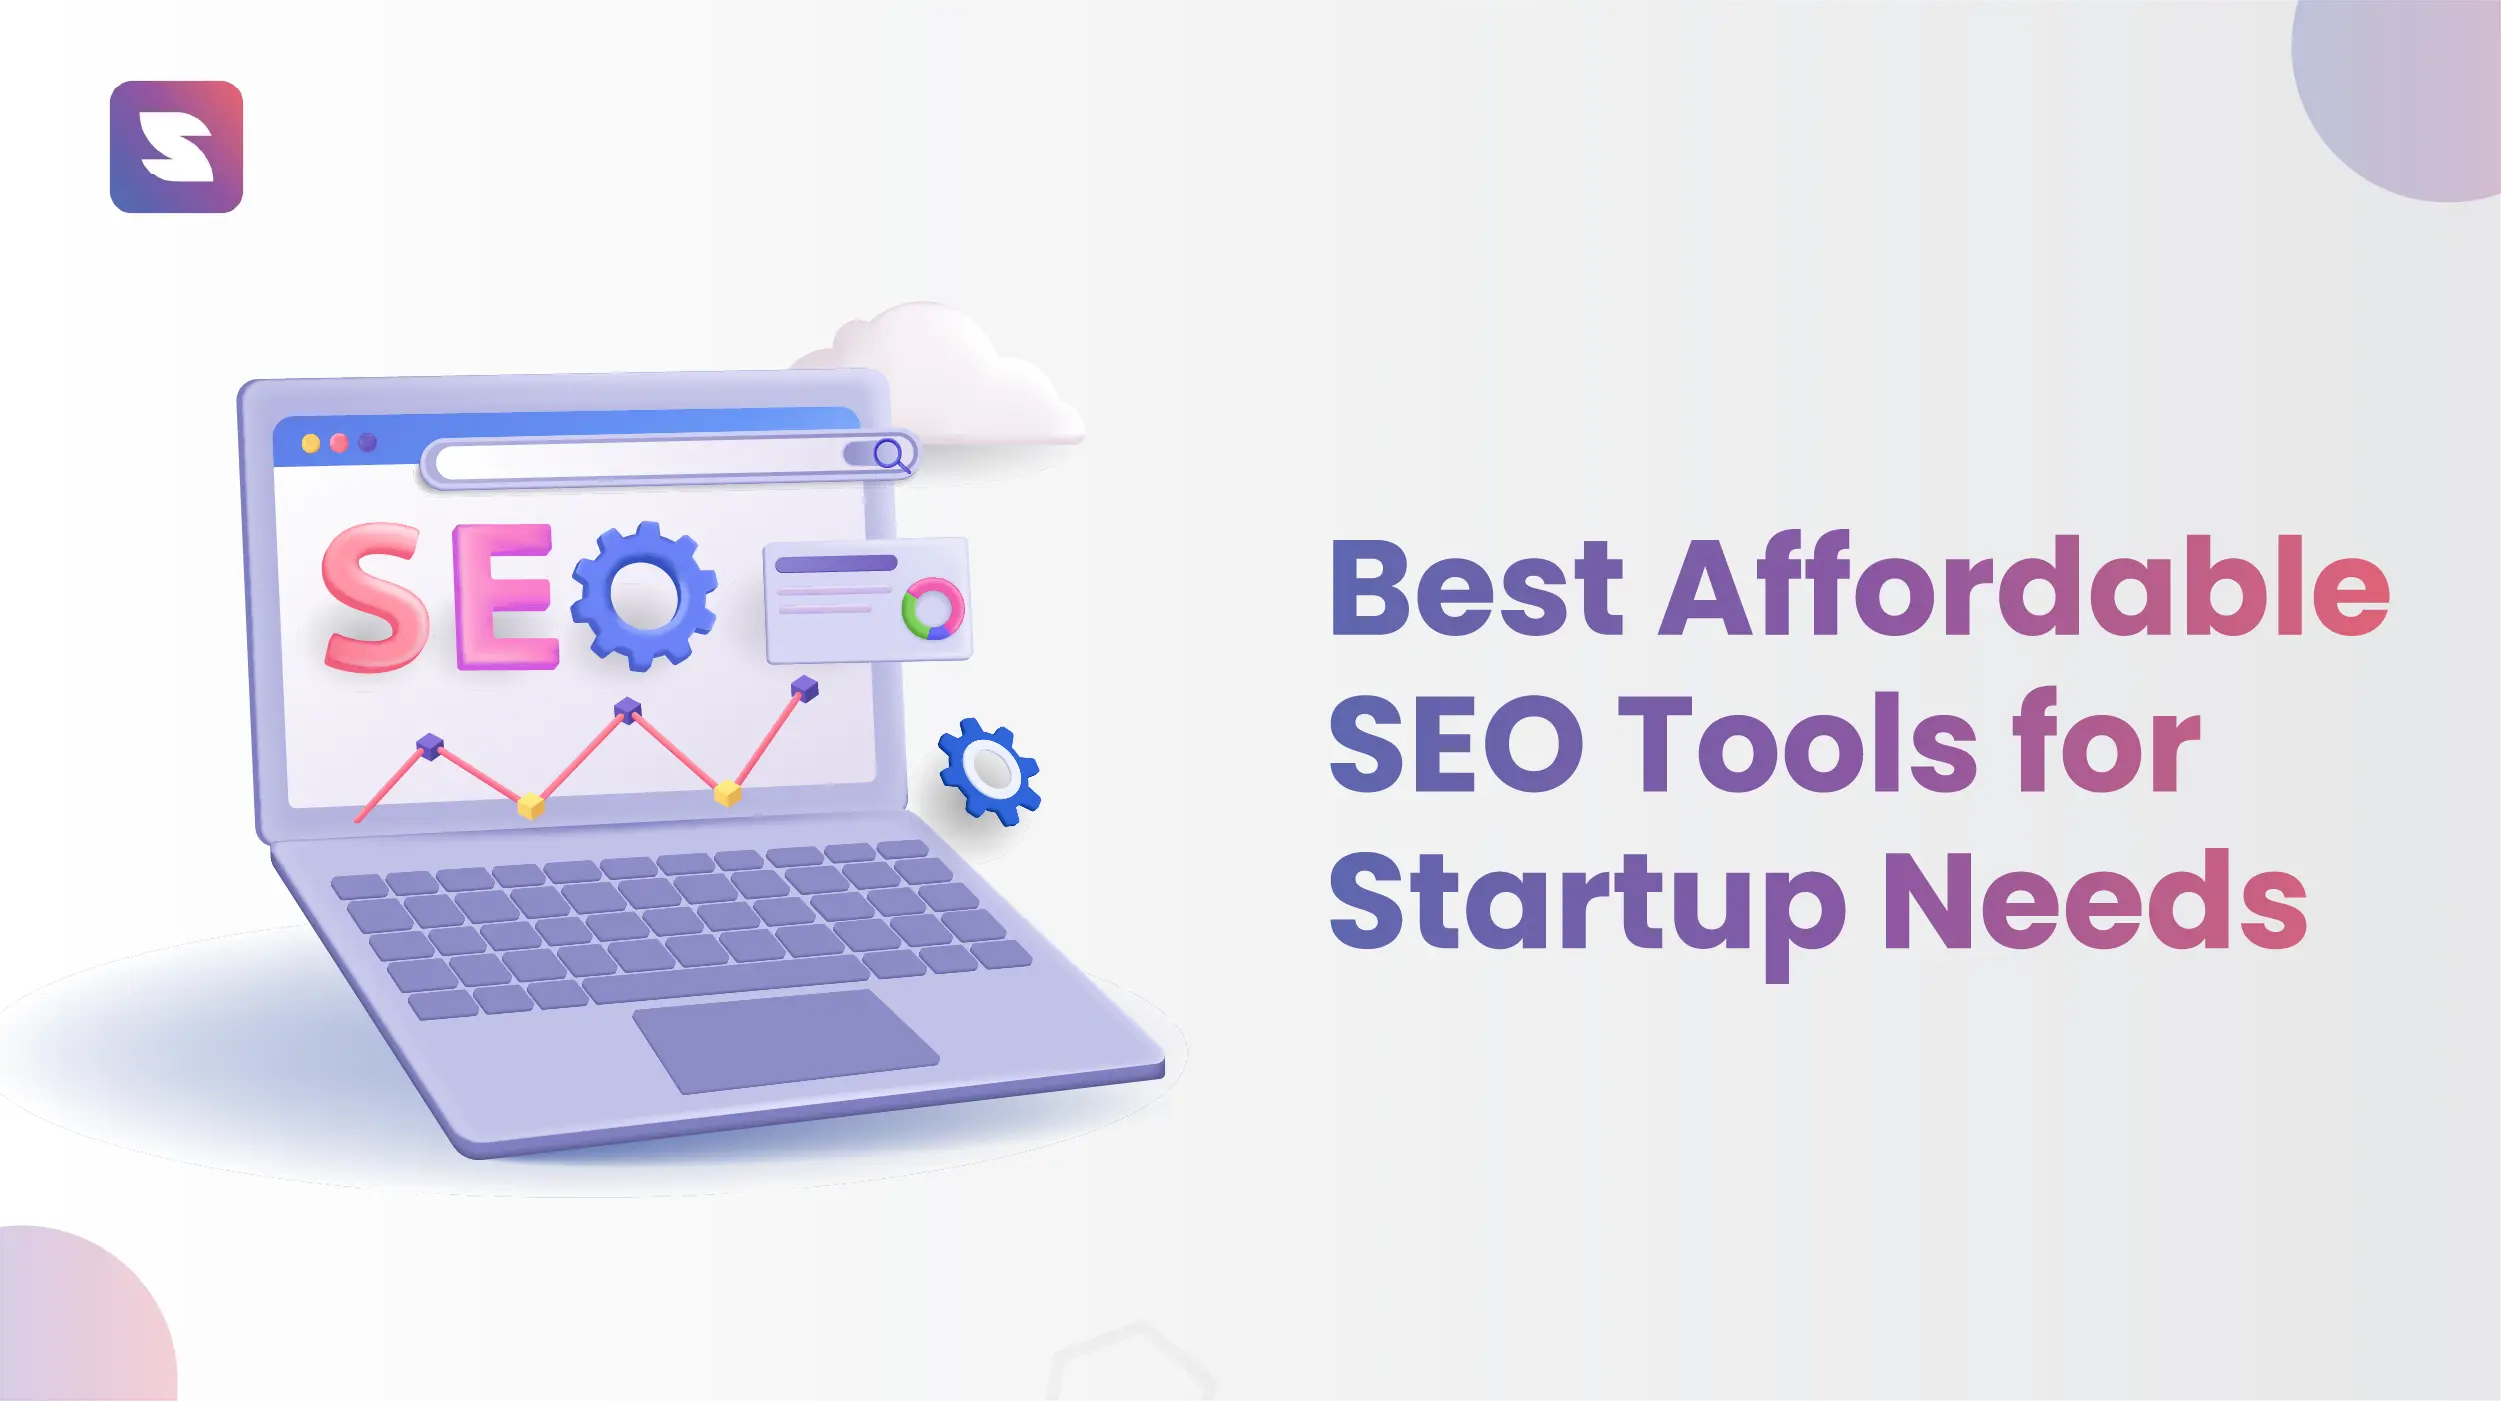 7 Best Affordable SEO Tools Every Startup Needs